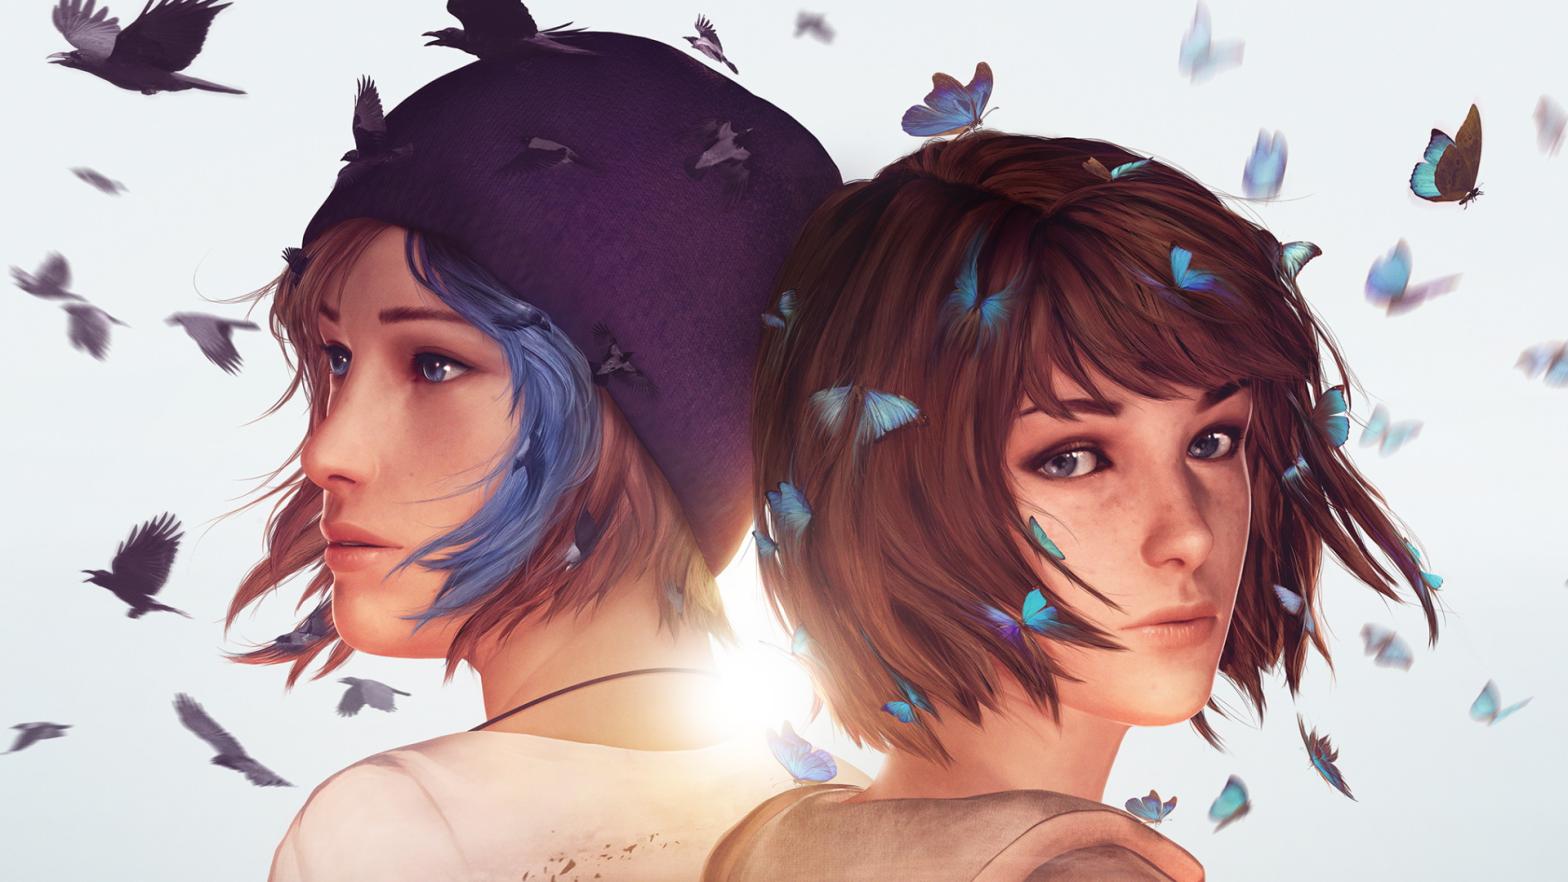 Max and Chloe return with upgraded visuals. (Image: Dontnod Entertainment / Deck Nine / Square Enix)